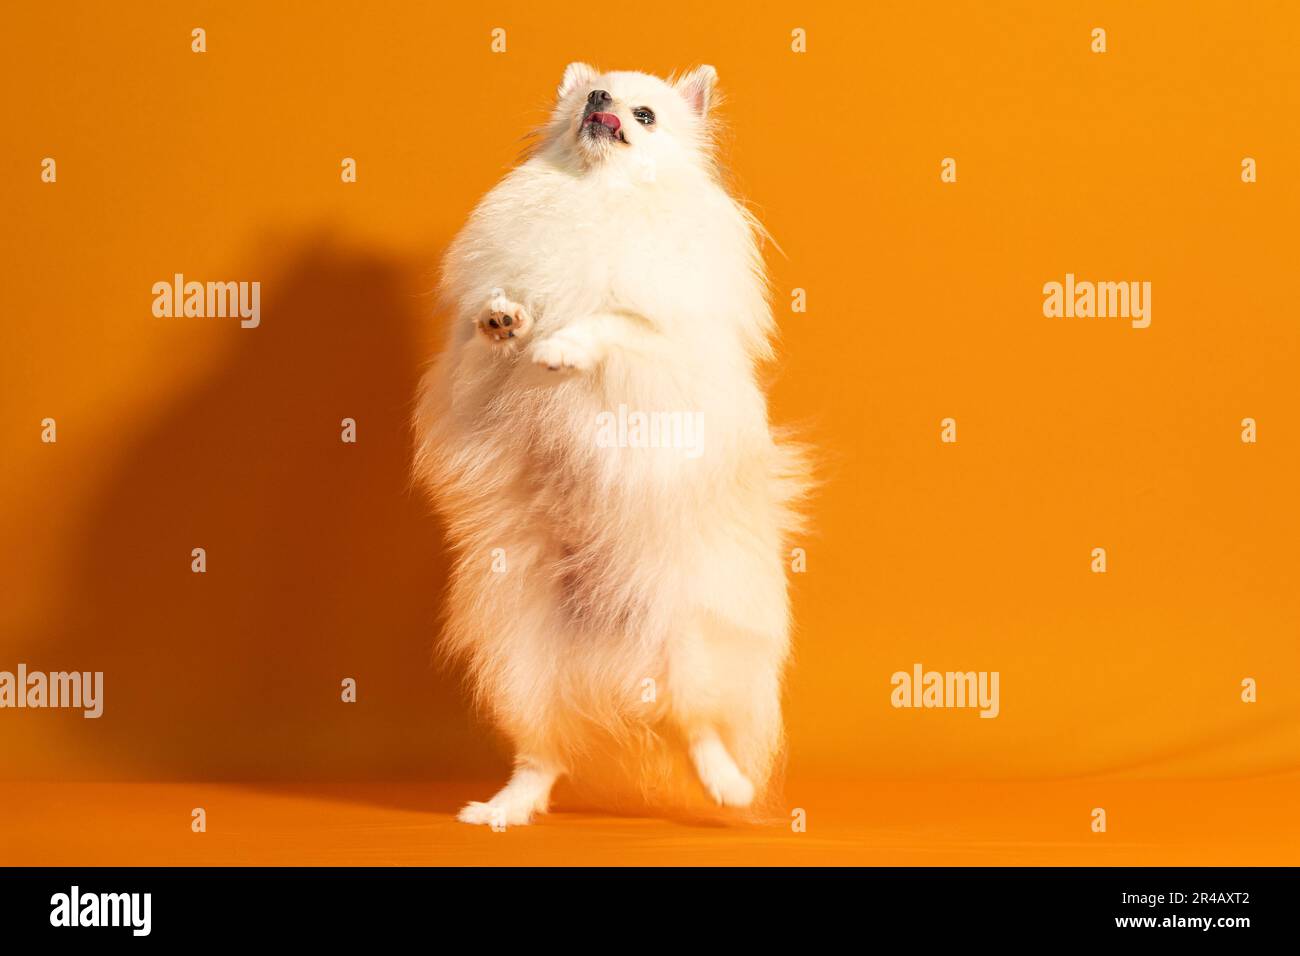 A white and fluffy dog standing upright in anticipation of its owner's return Stock Photo